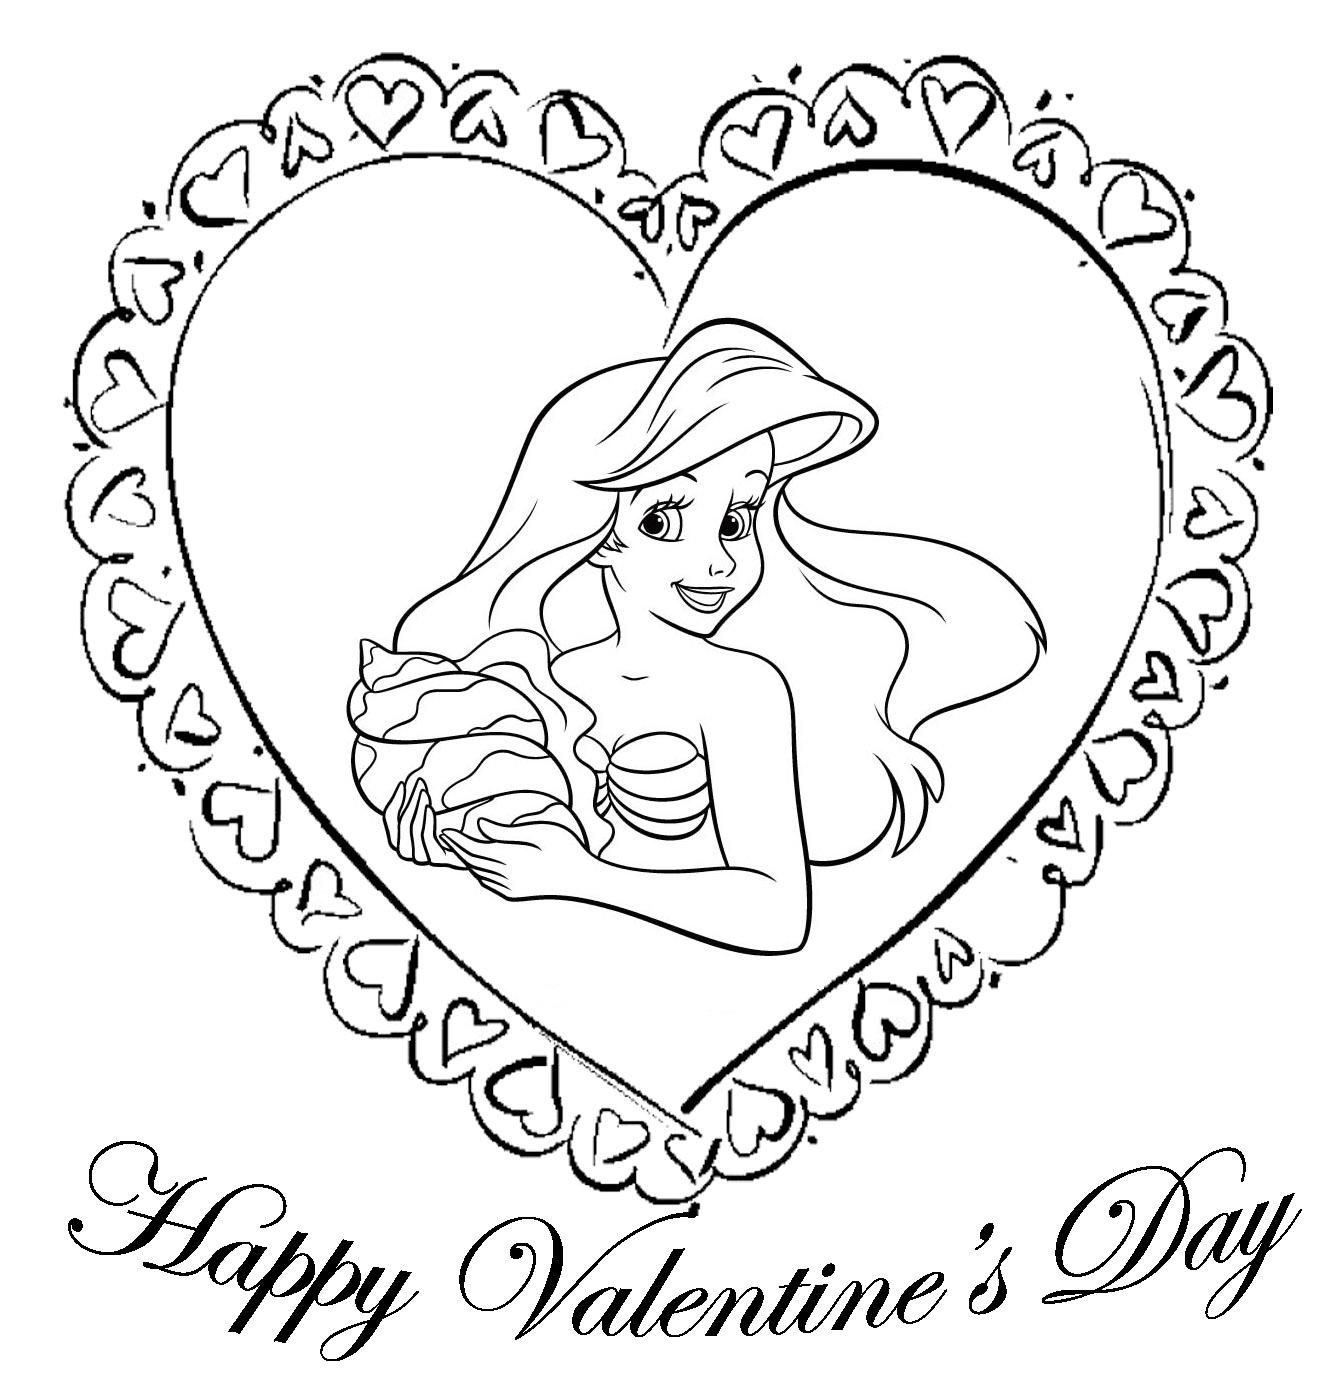 Ariel coloring pages to download and print for free